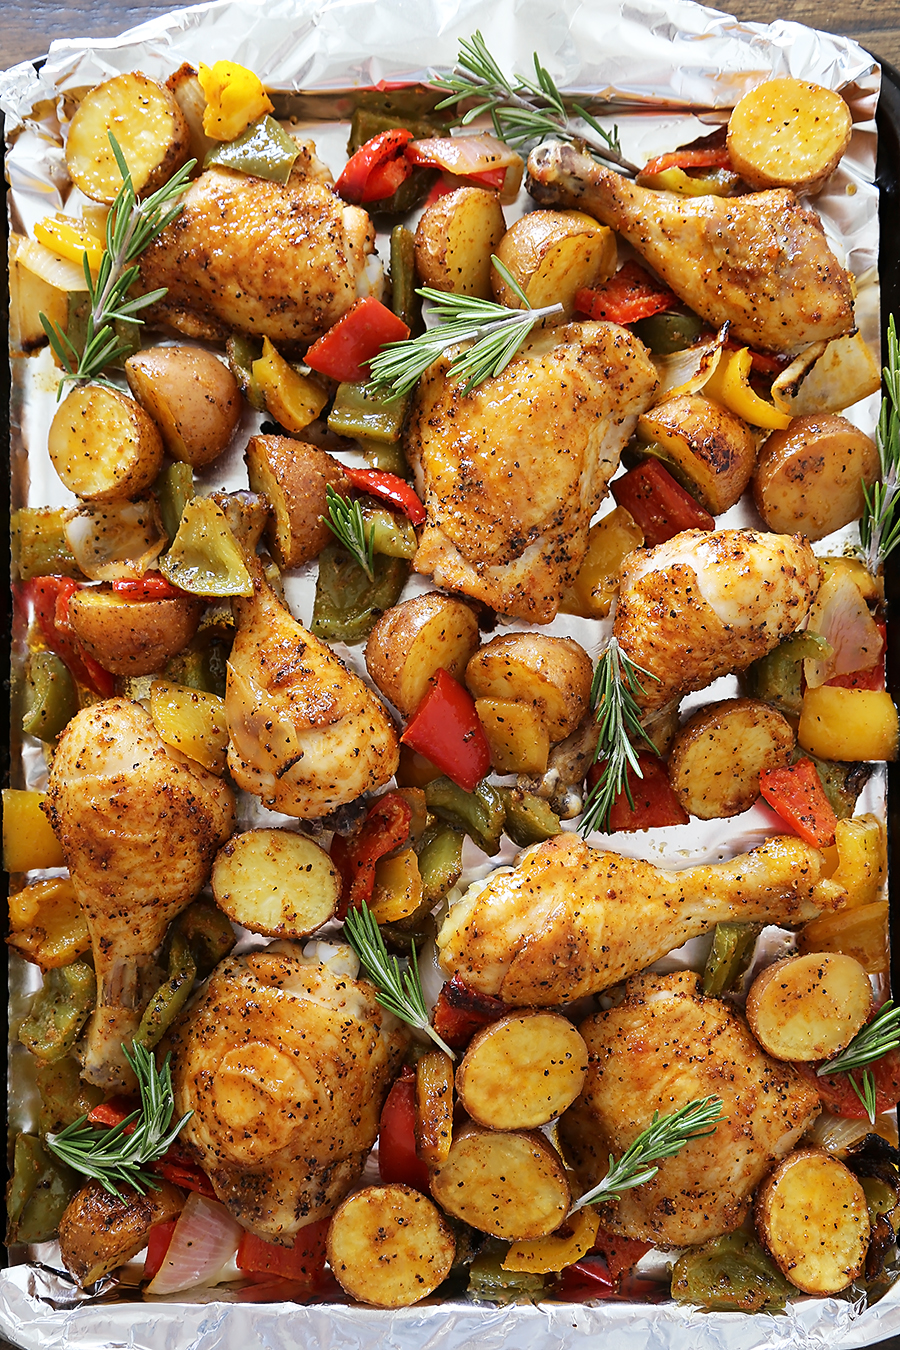 Rosemary Roasted Chicken with Bell Peppers and Potatoes - Crispy, tender roasted chicken with bell peppers, potatoes and onions makes an easy one-pan weeknight meal! Thecomfortofcooking.com